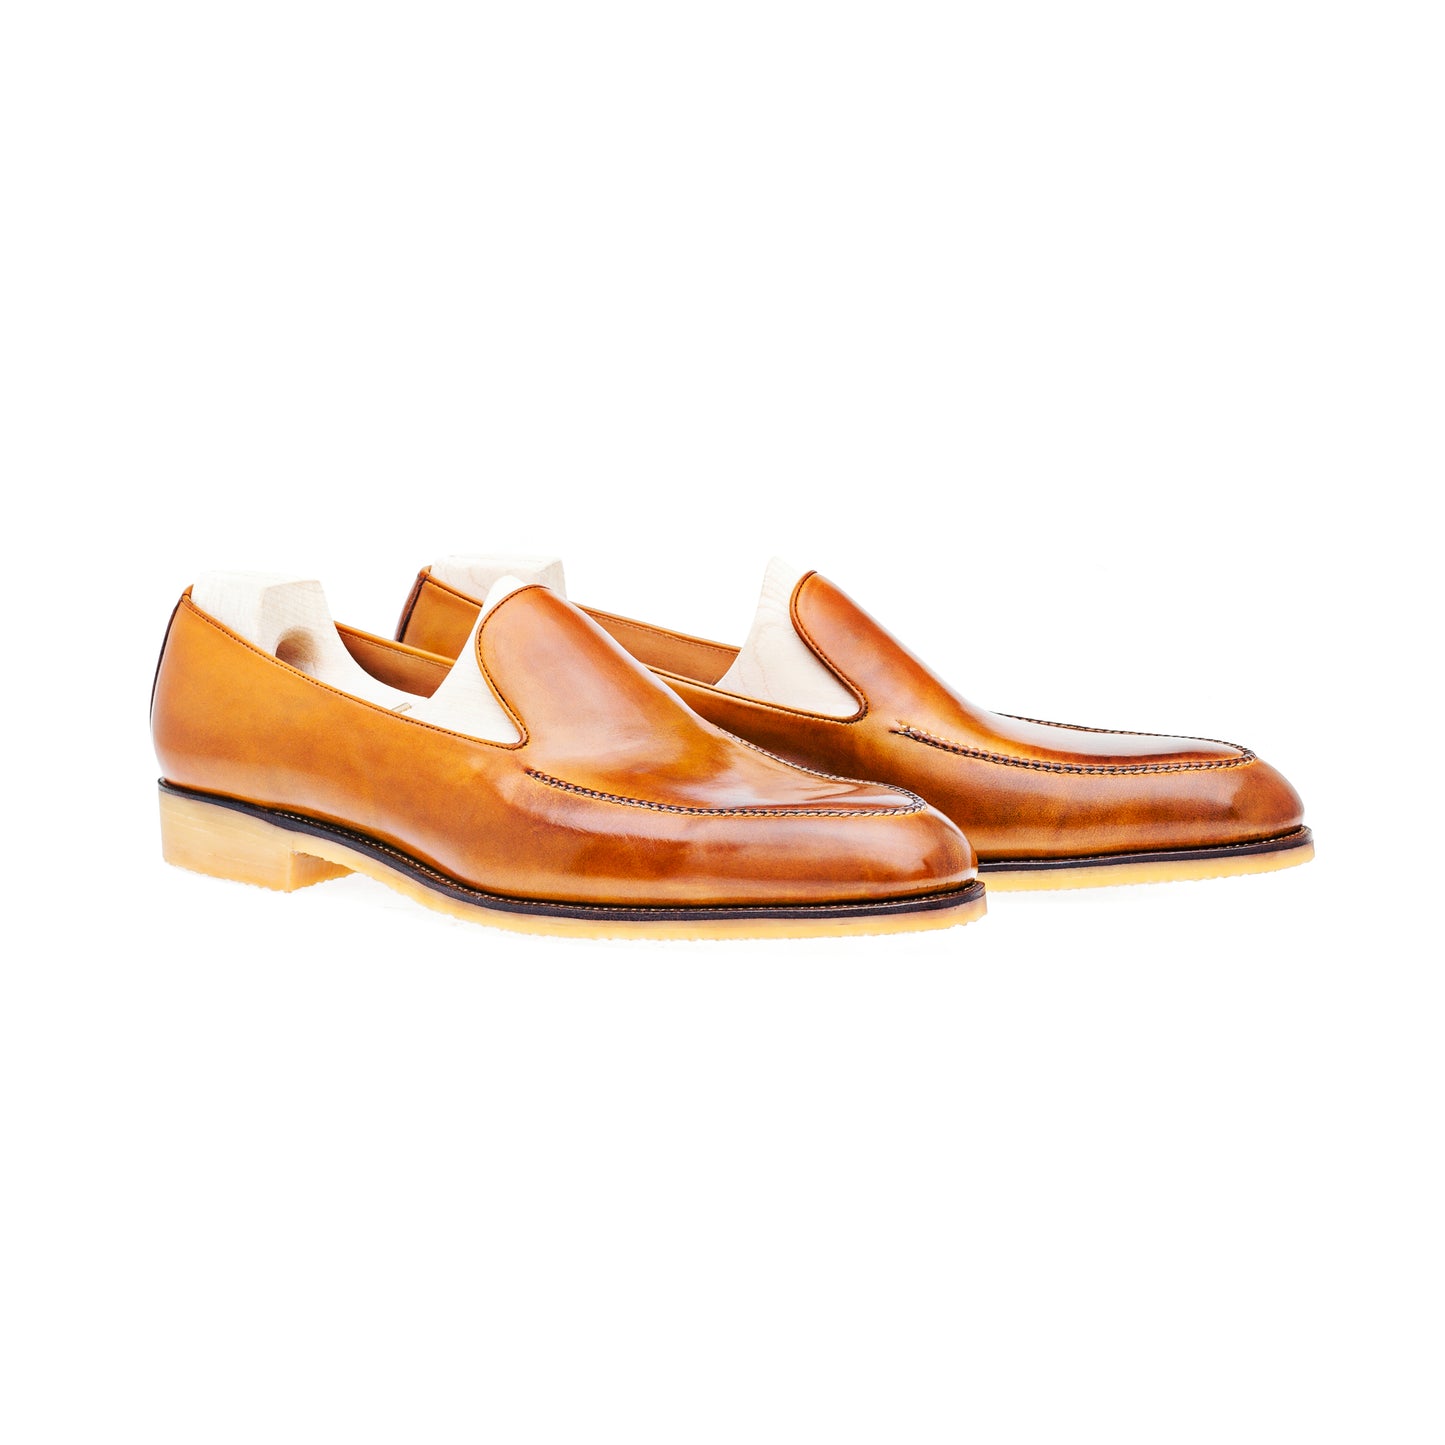 Elegant Loafer with hand stitched apron and crep sole